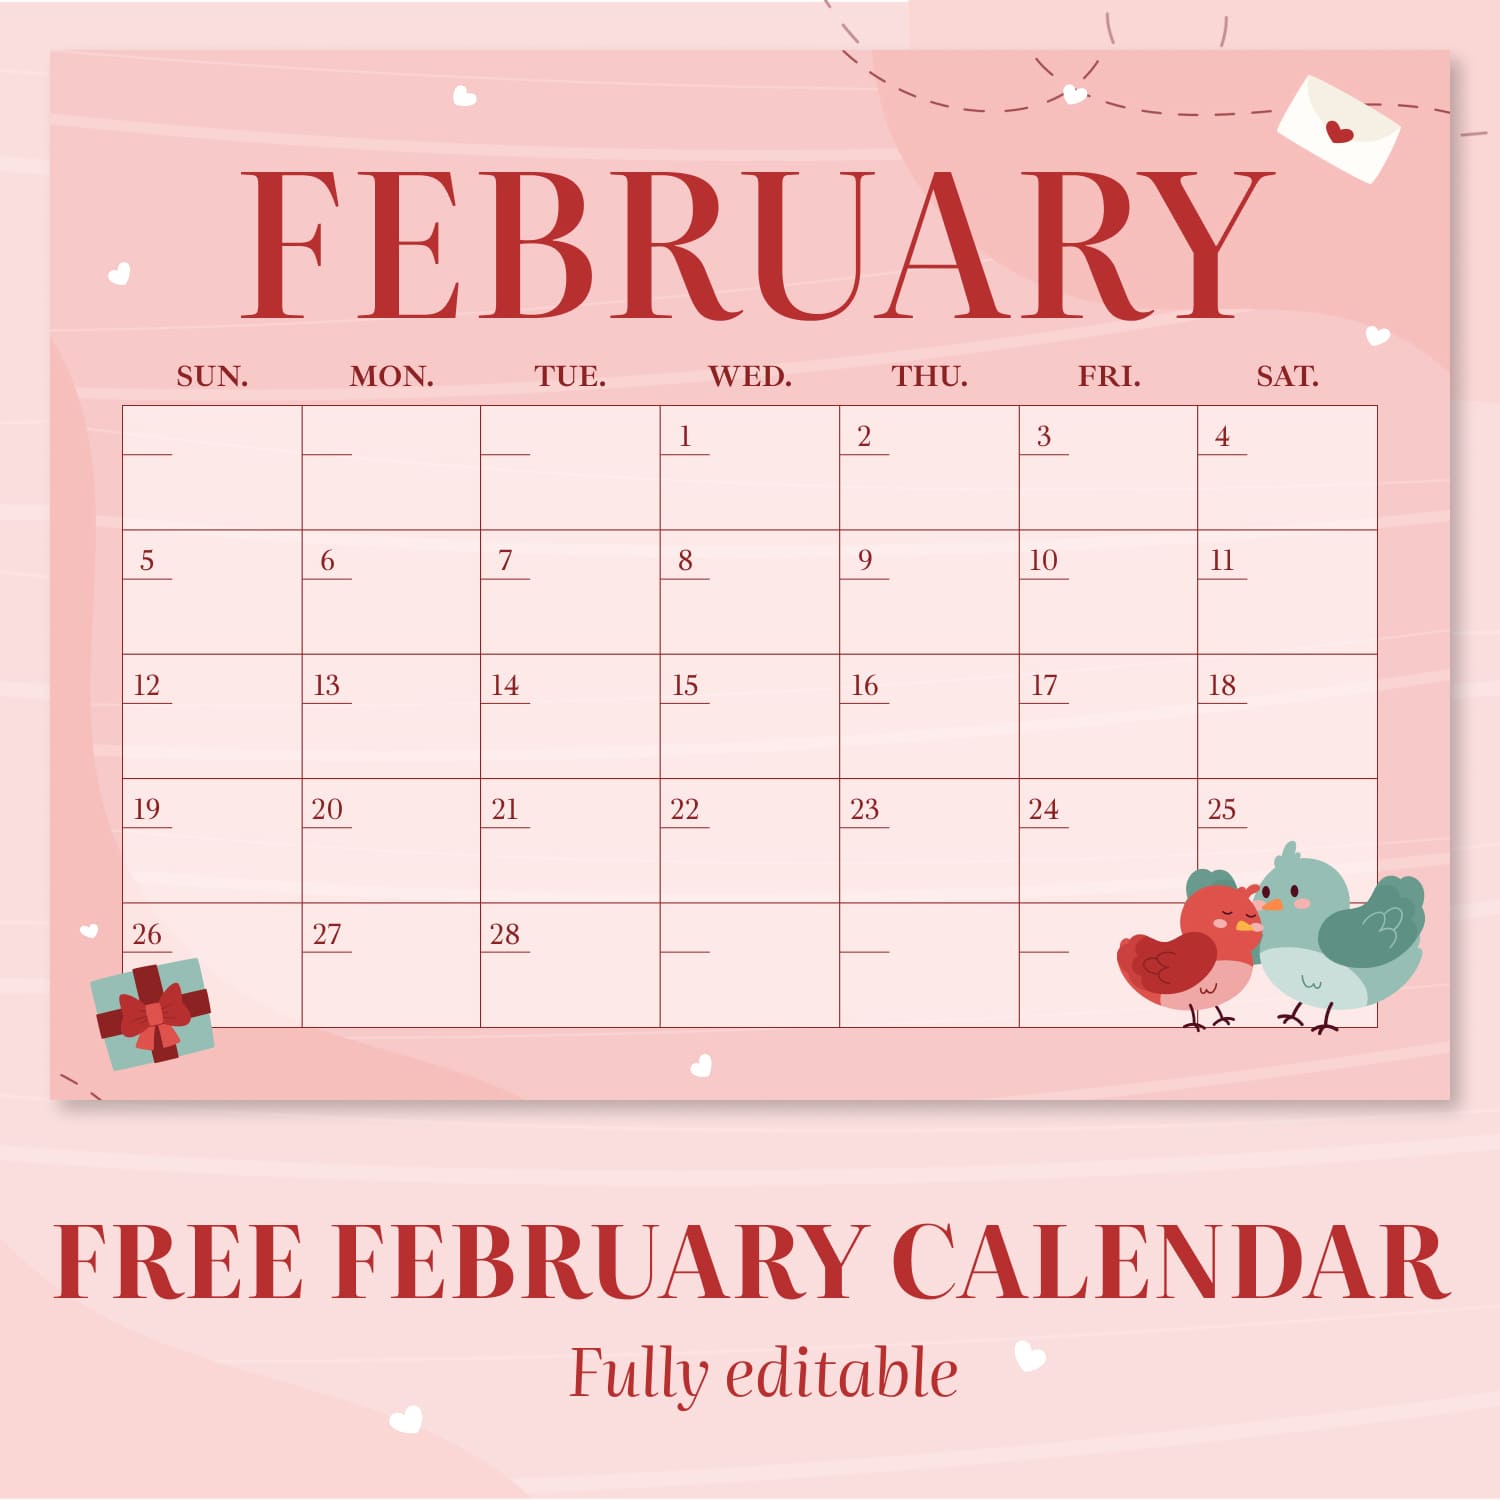 Free Calendar for February, main picture 1500x1500.